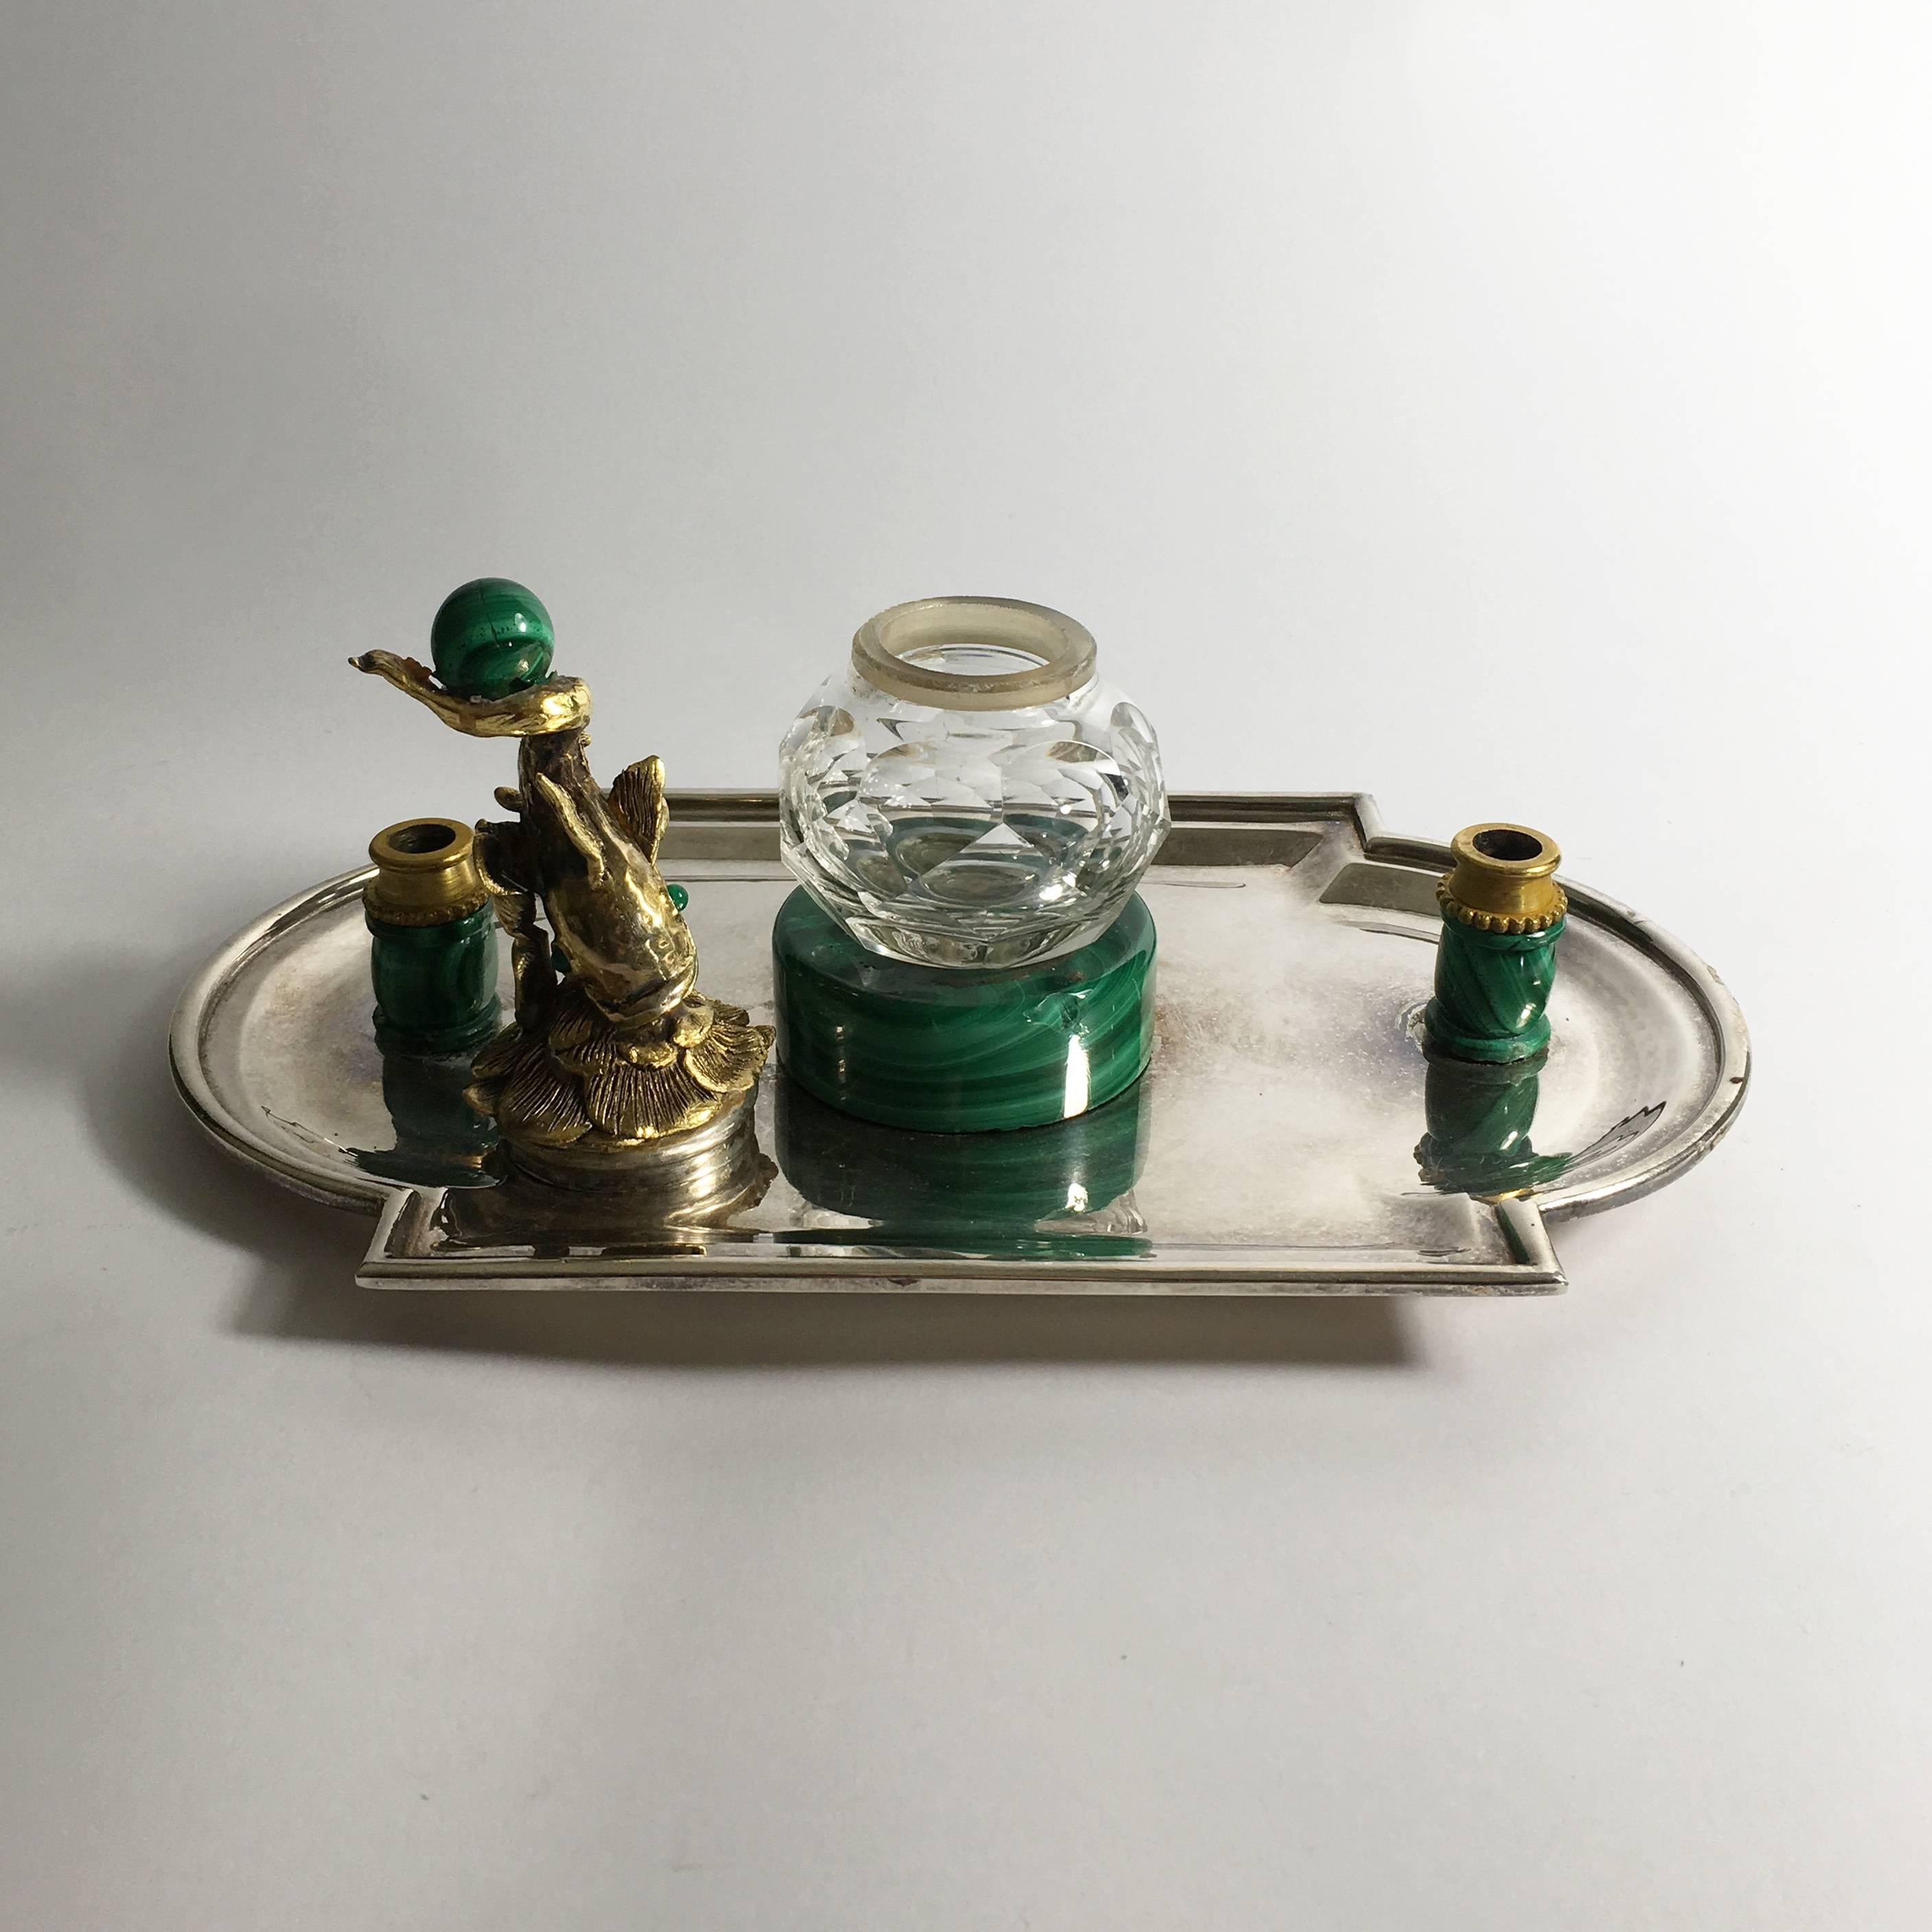 Late 19th Century 19th Century Italian Silver, Ormolu, Malachite and Crystal Inkwell with Fish